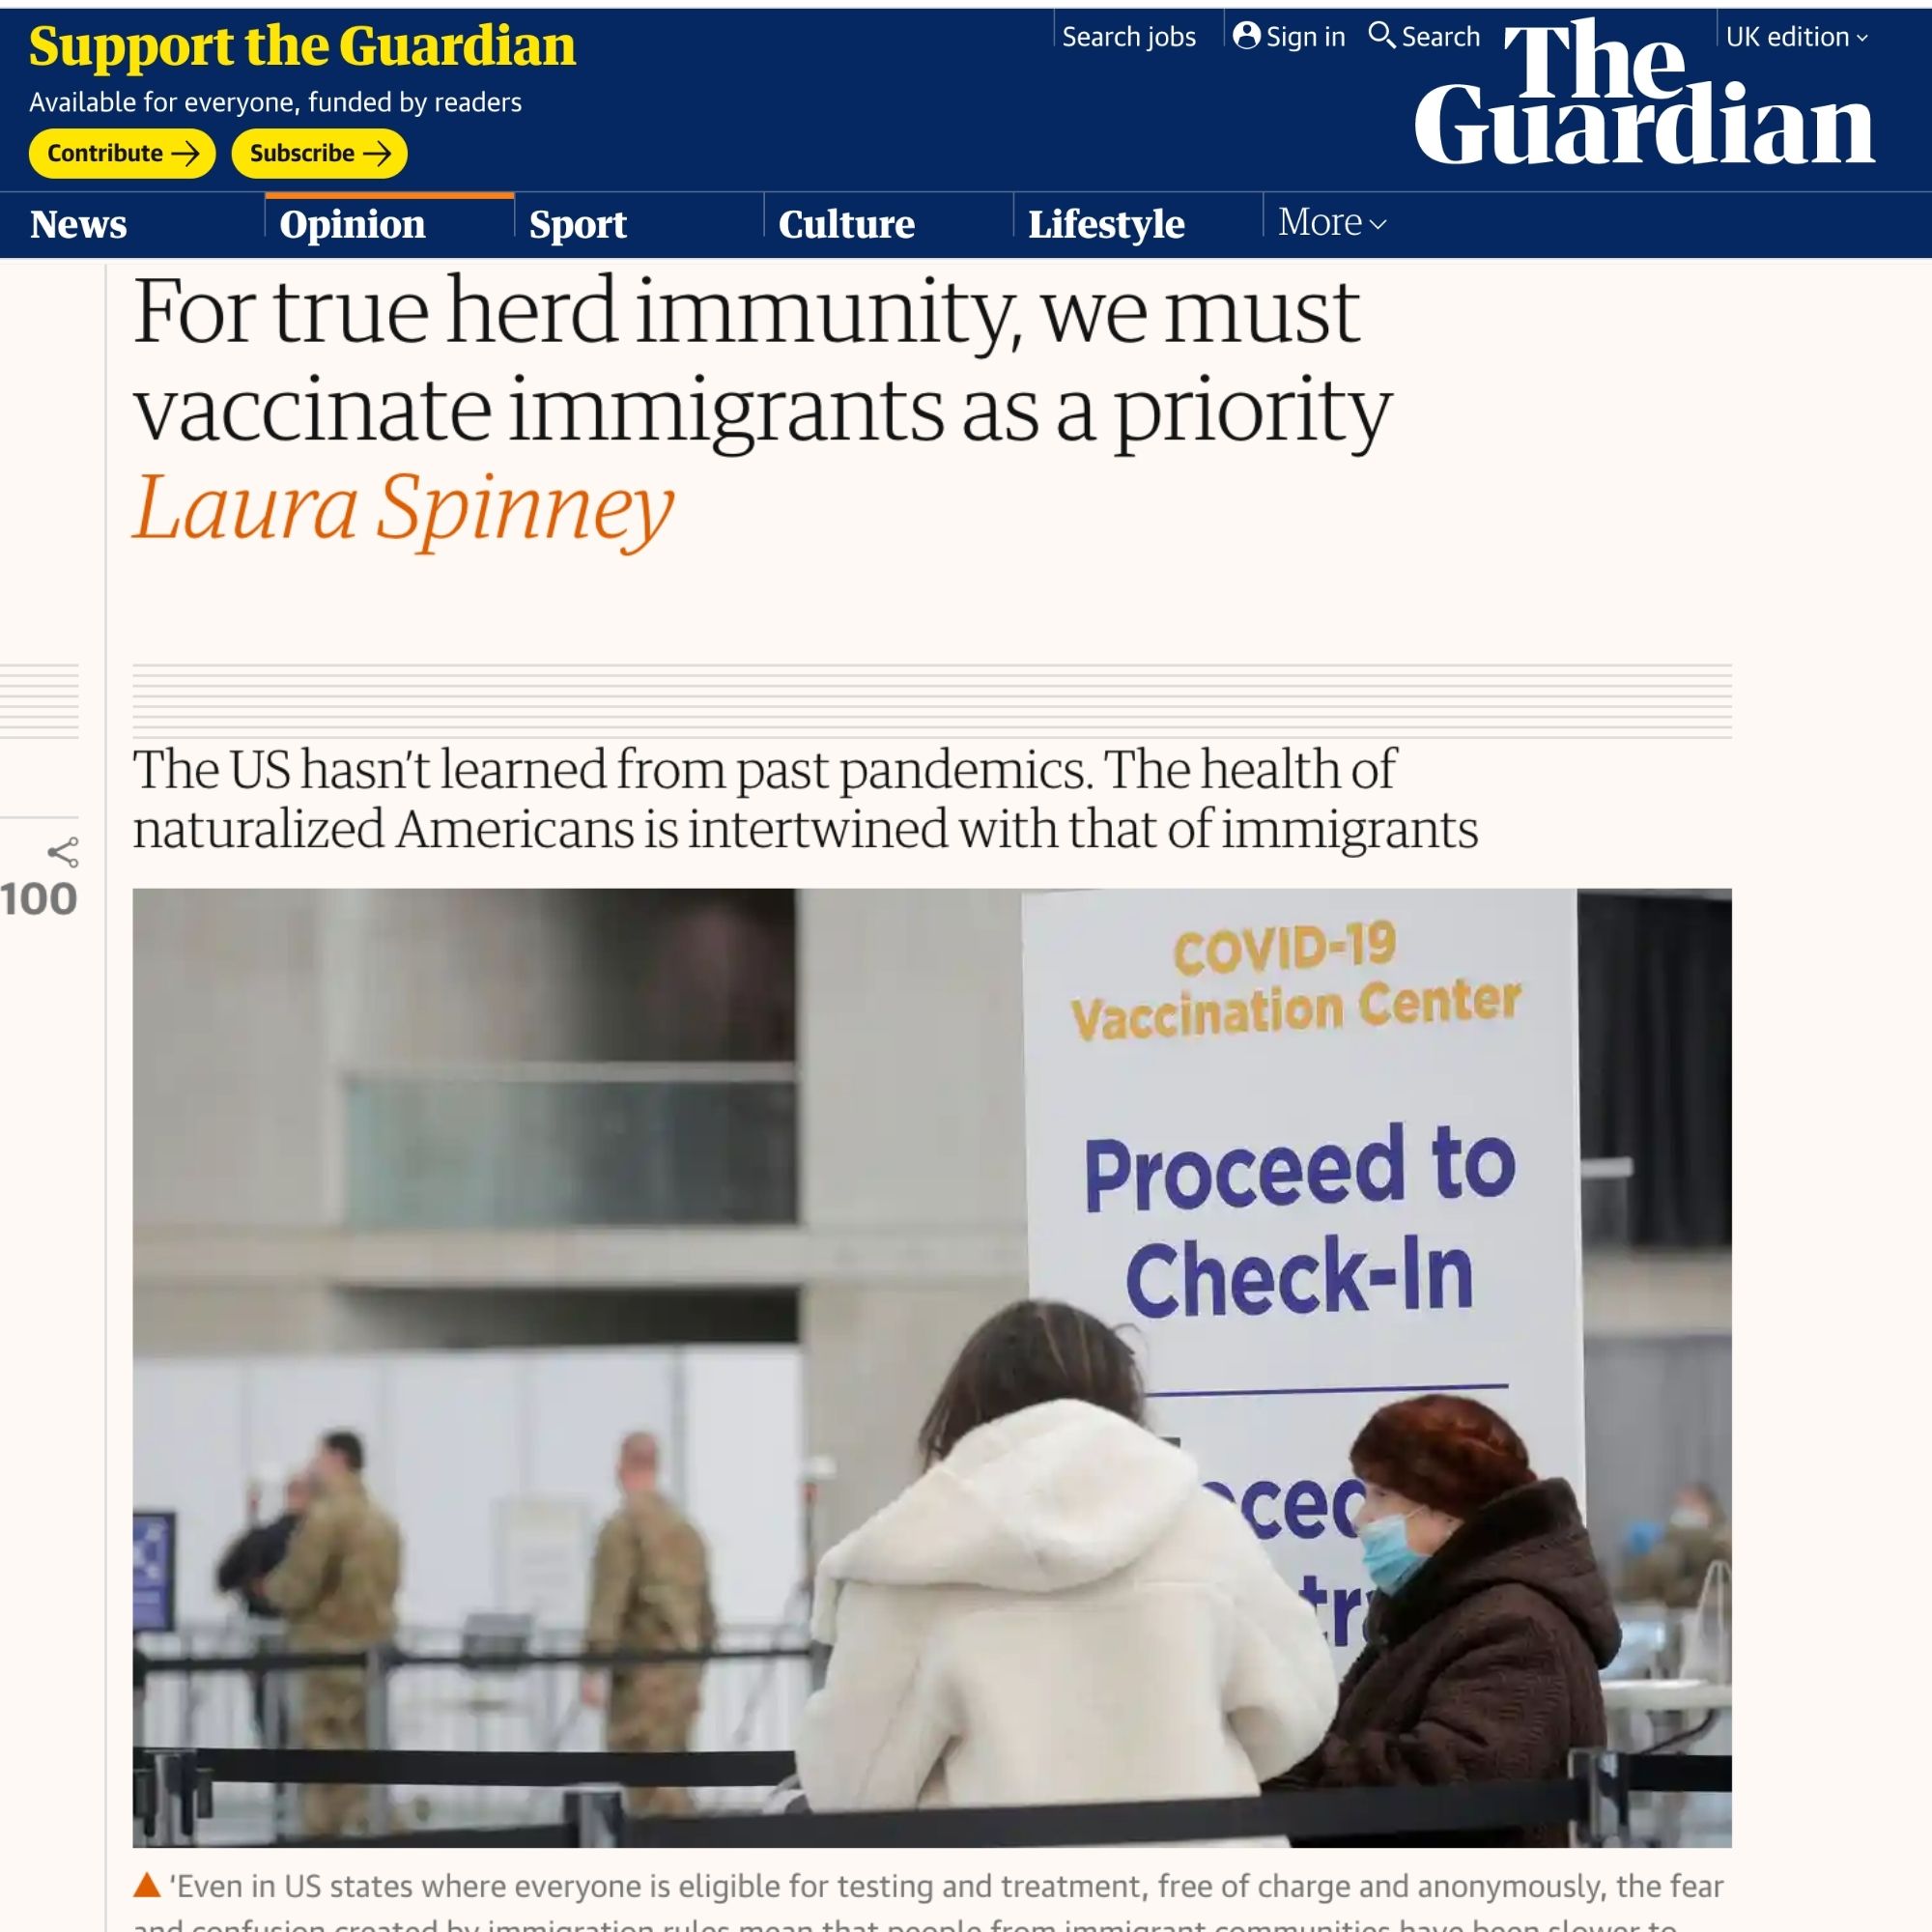 For true herd immunity, we must vaccinate immigrants as a priority